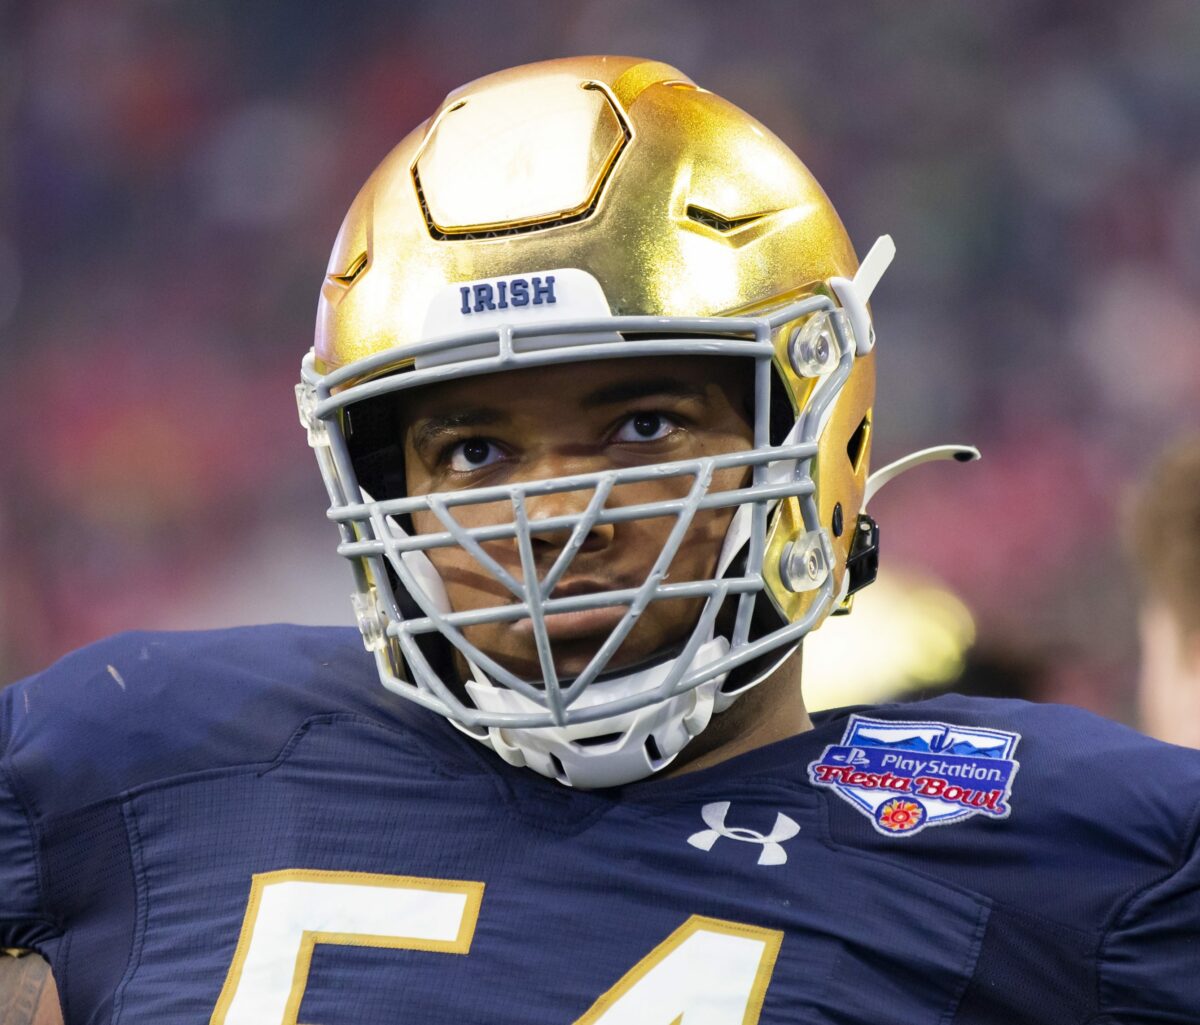 Lions draft prospect of the day: Blake Fisher, OT, Notre Dame